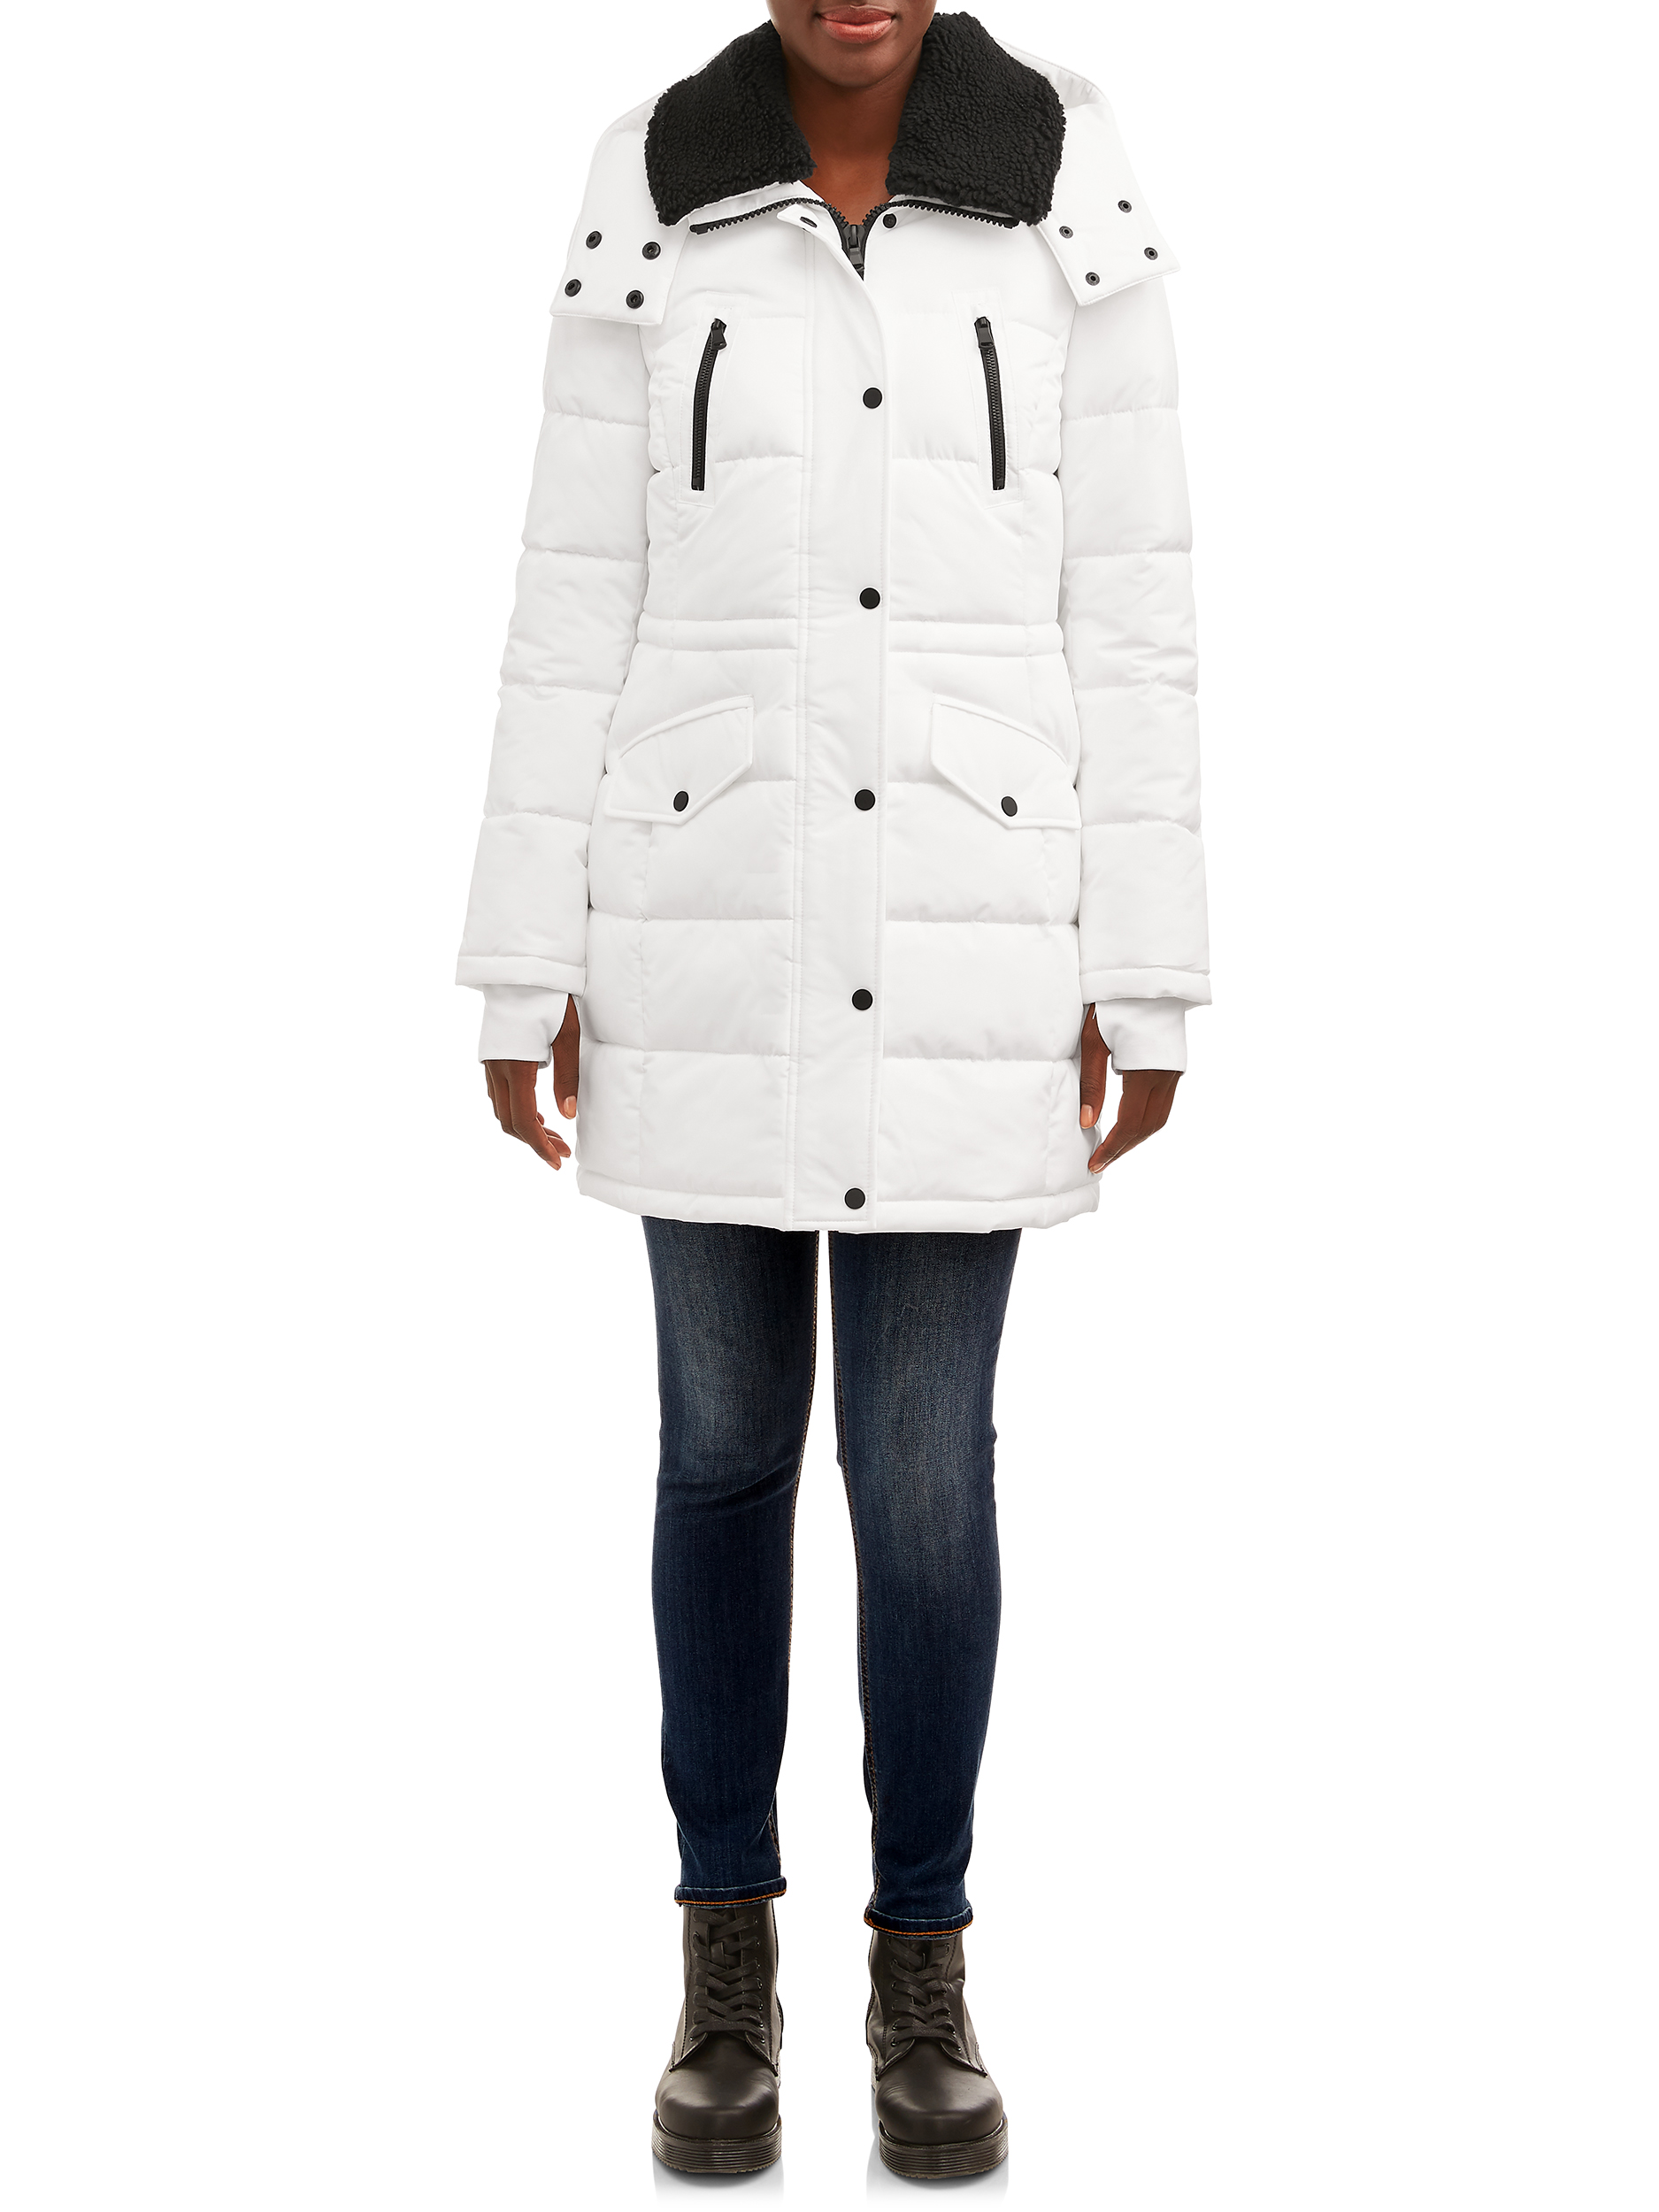 F.O.G. Women's Long Puffer with Snap Front Closure - image 2 of 4